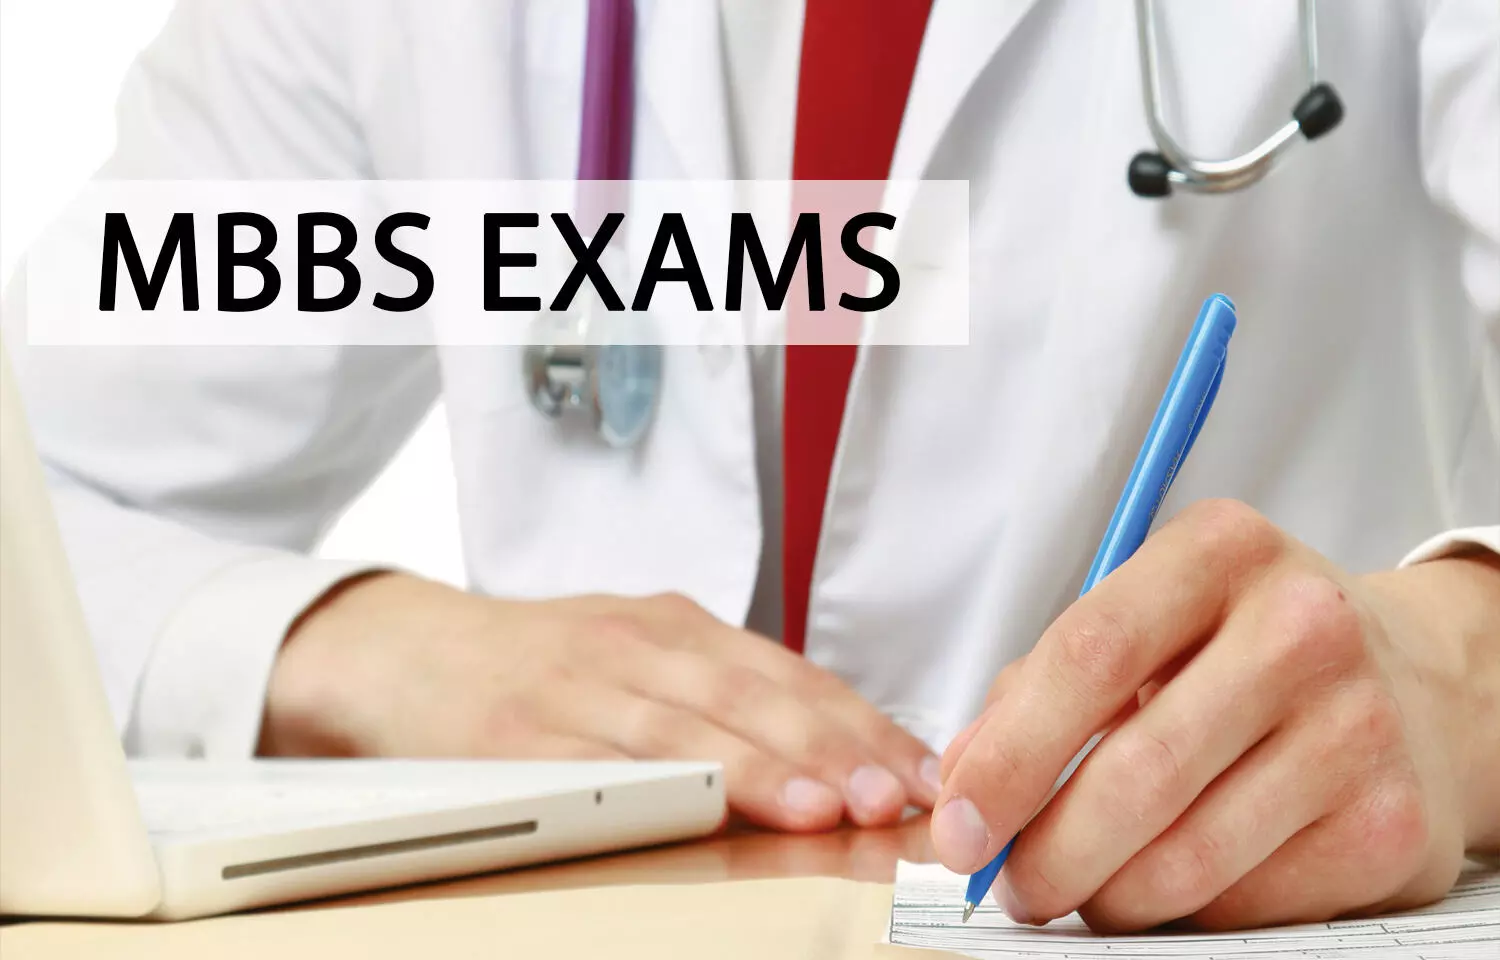 AIIMS First MBBS Professional Exams to begin from 21st October, View full schedule here